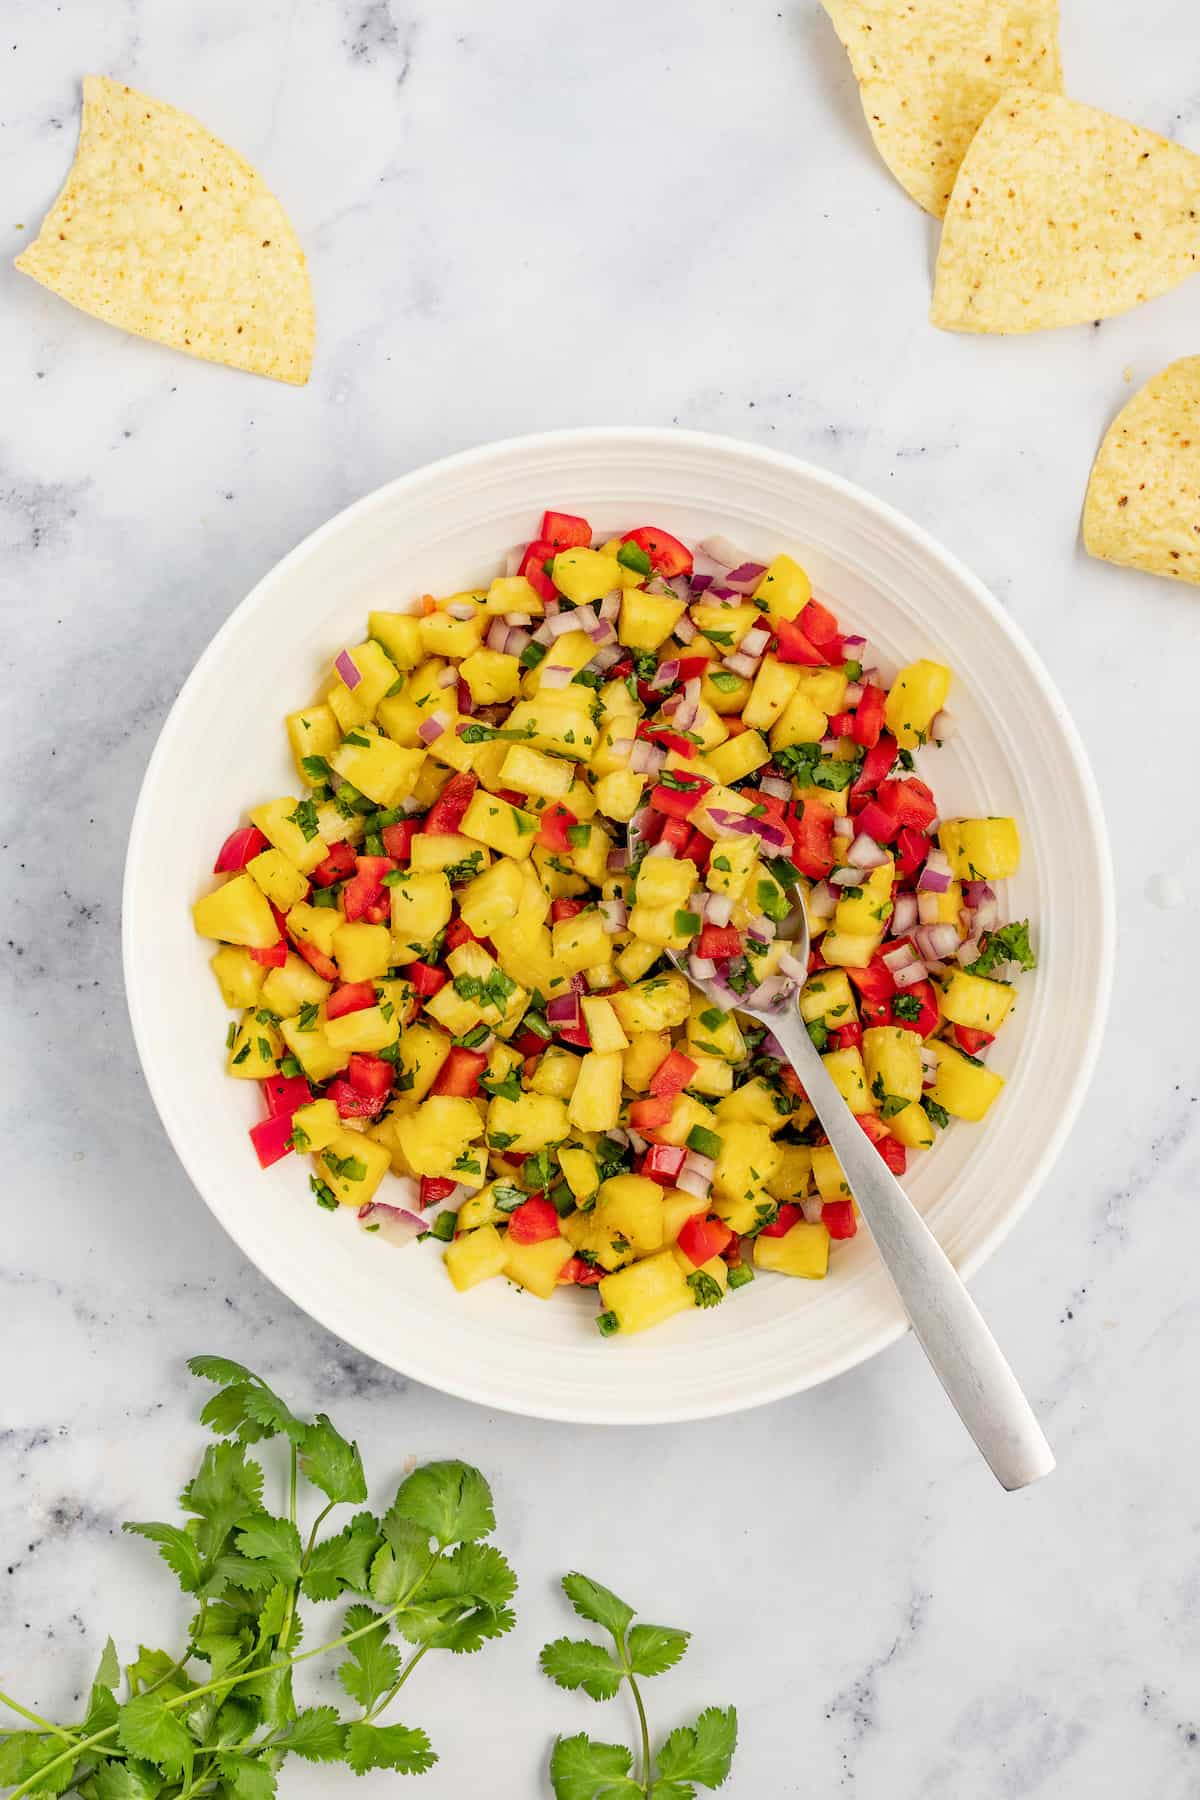 Pineapple salsa in a bowl with corn chips on the side.